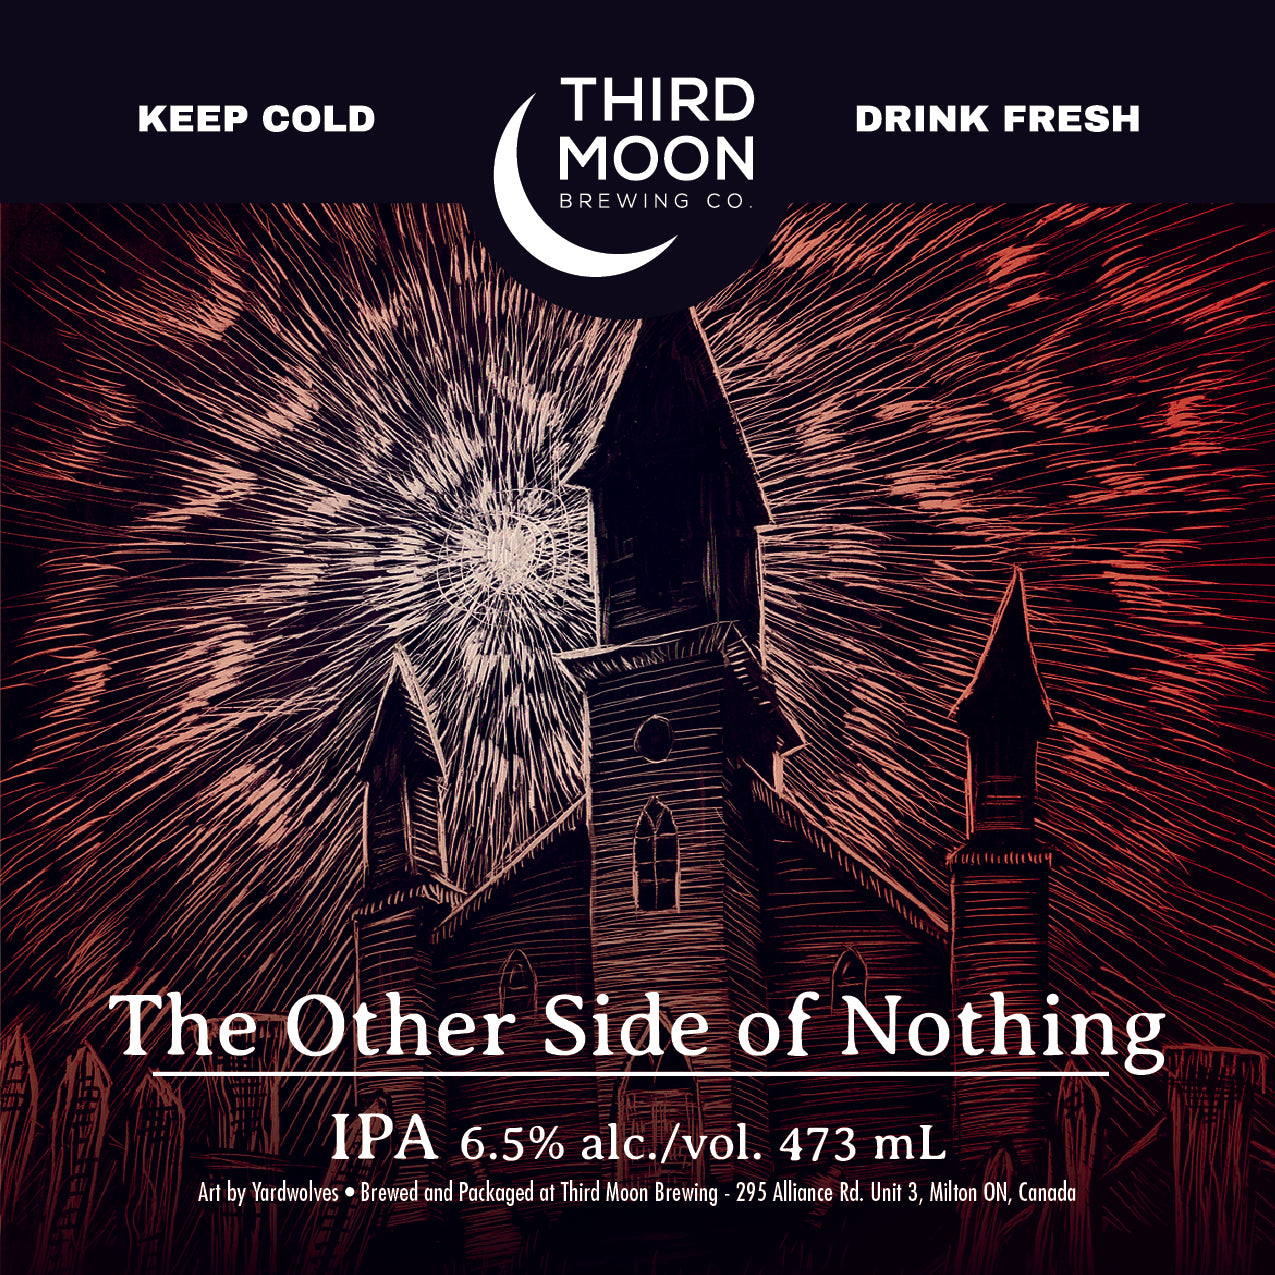 IPA - 4-pk of "The Other Side Of Nothing" tall cans